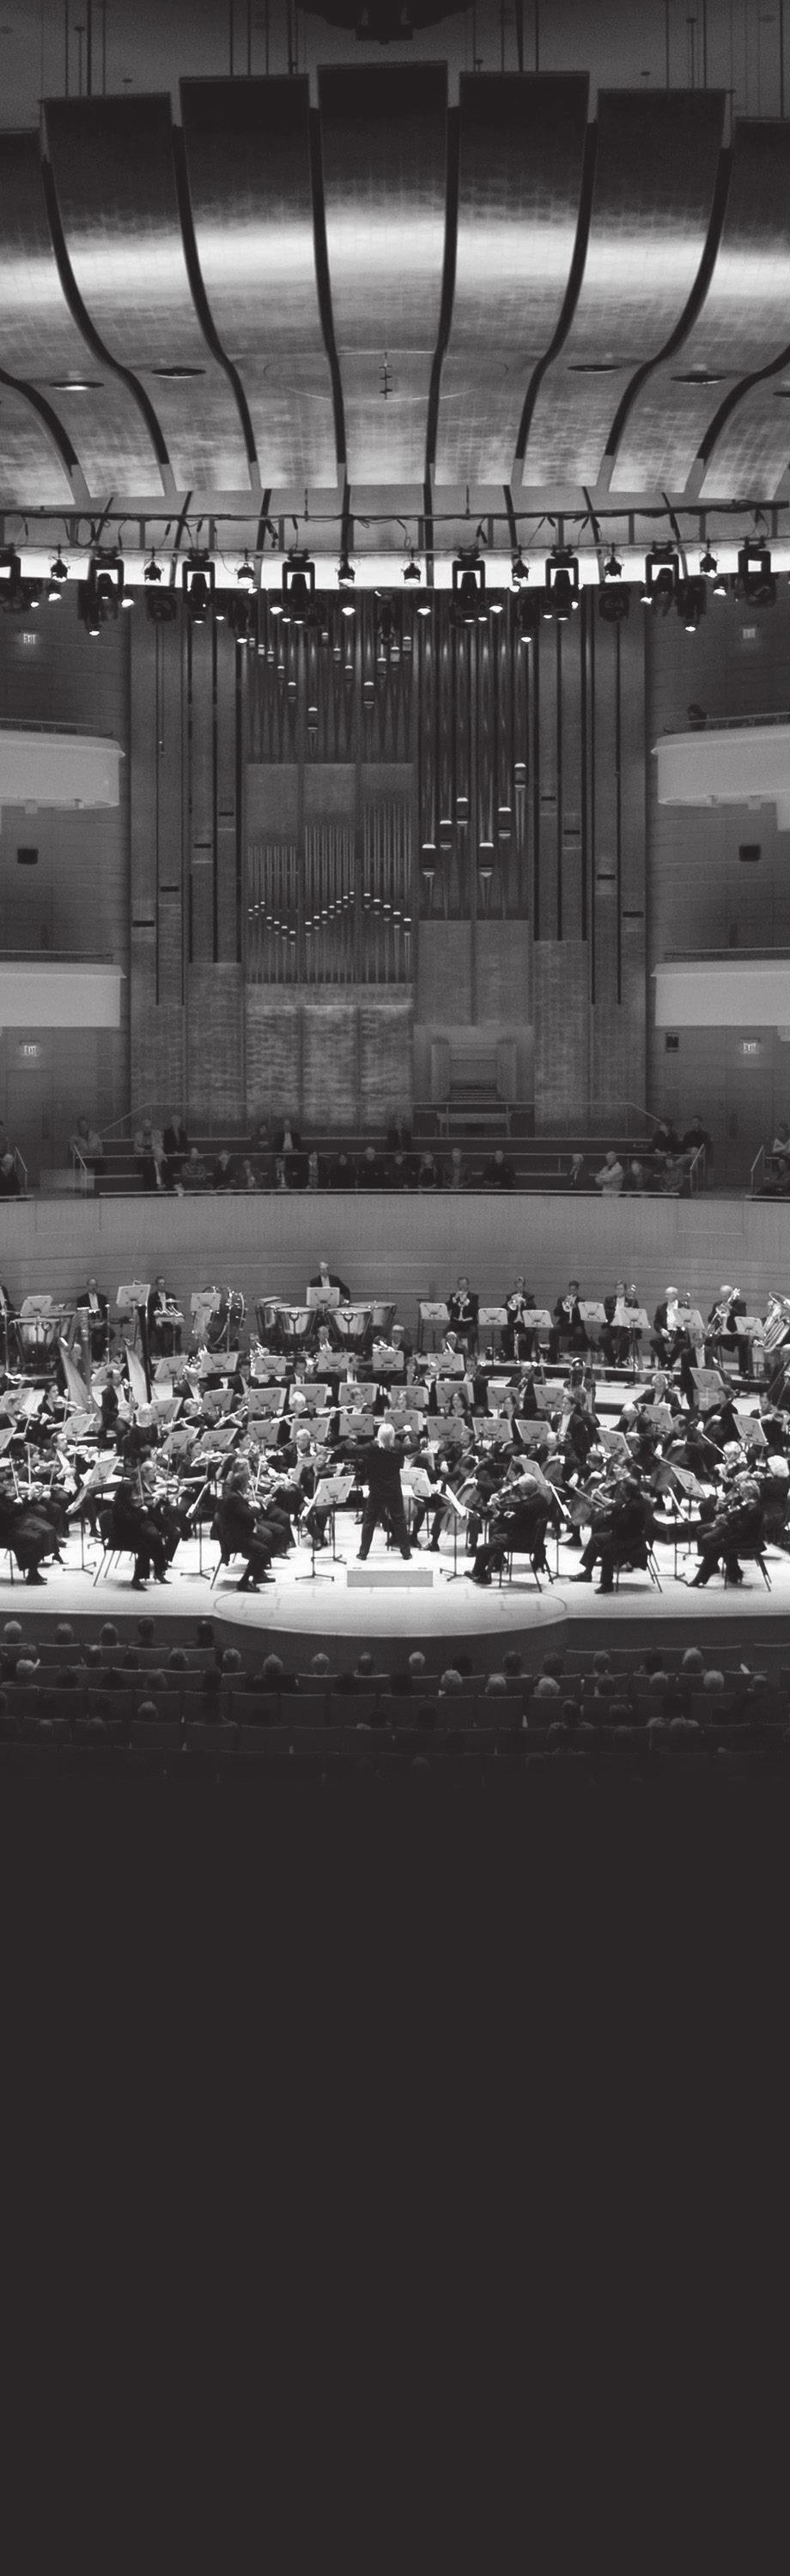 ABOUT pacific symphony Pacific Symphony, currently in its 37th season, is led by Music Director Carl St.Clair, who celebrates his 26th season with the orchestra in 2015-16.